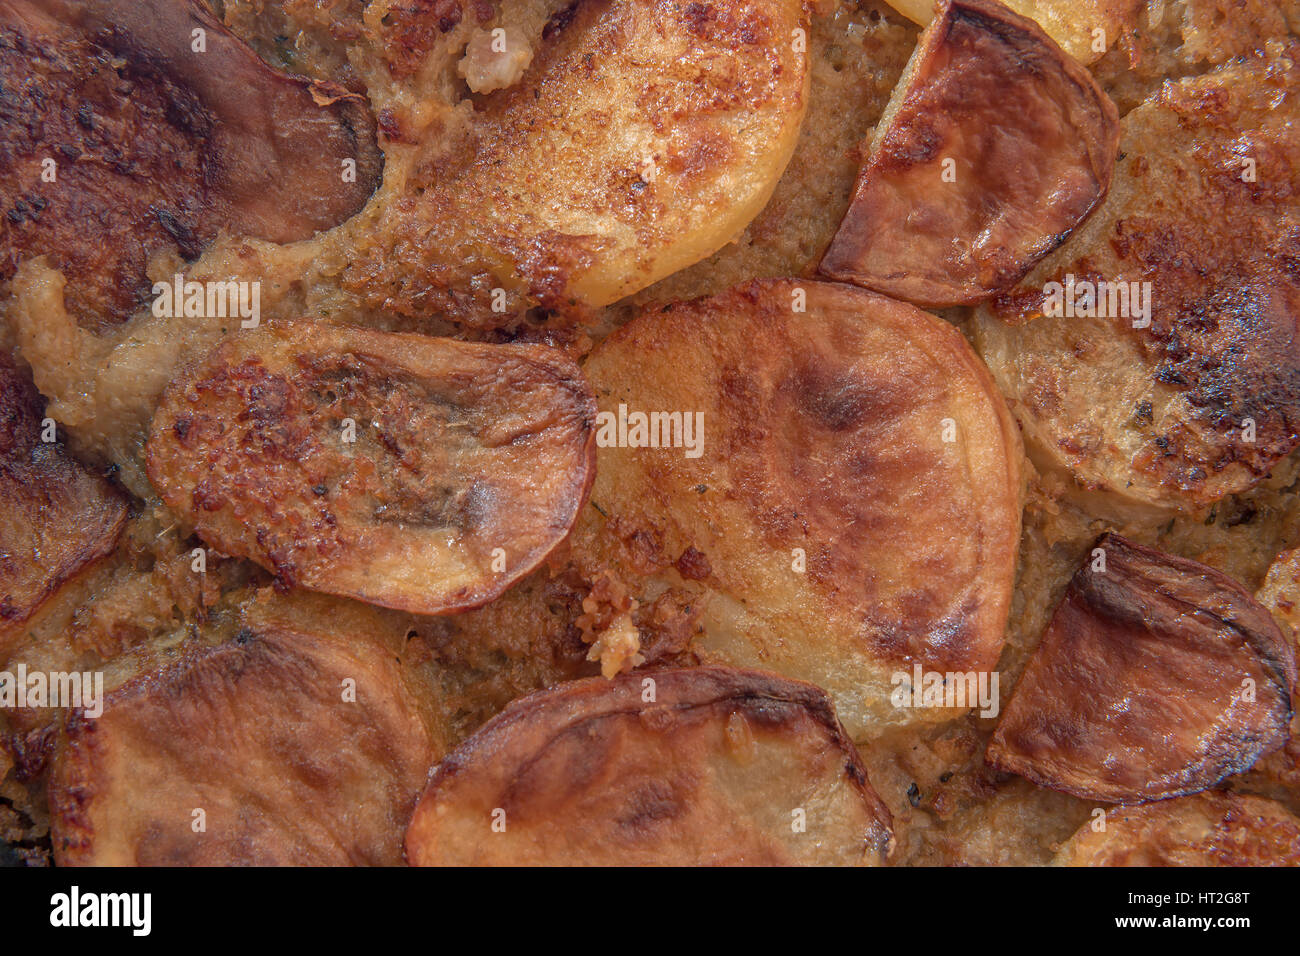 Crunchy Potato Serbian Moussaka with minced pork meat and eggs baked in high temperature oven, closeup with creative lighting Stock Photo